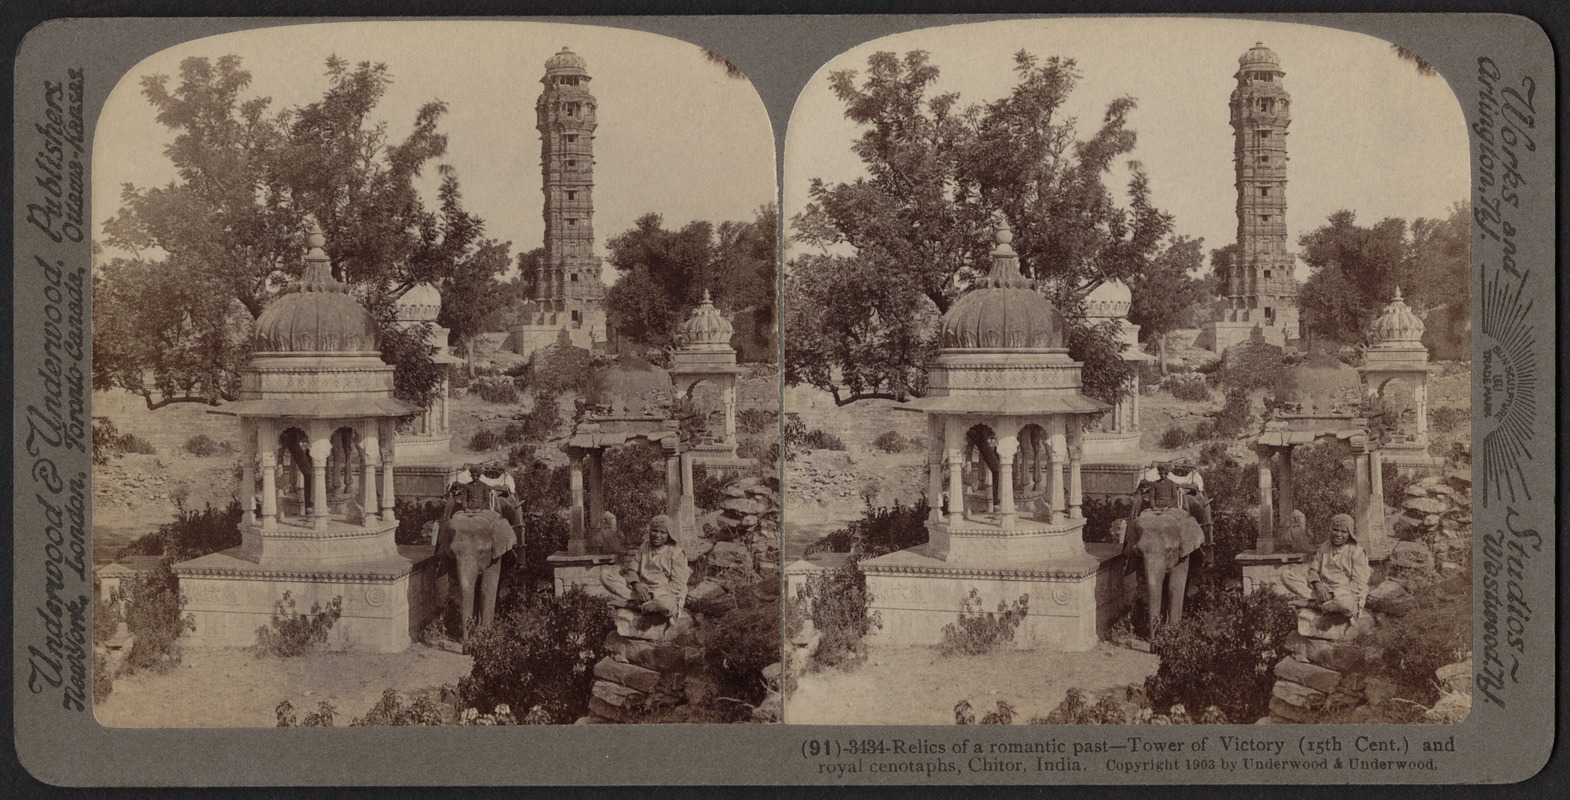 Tower of Victory and royal cenotaphs, Chitor, India